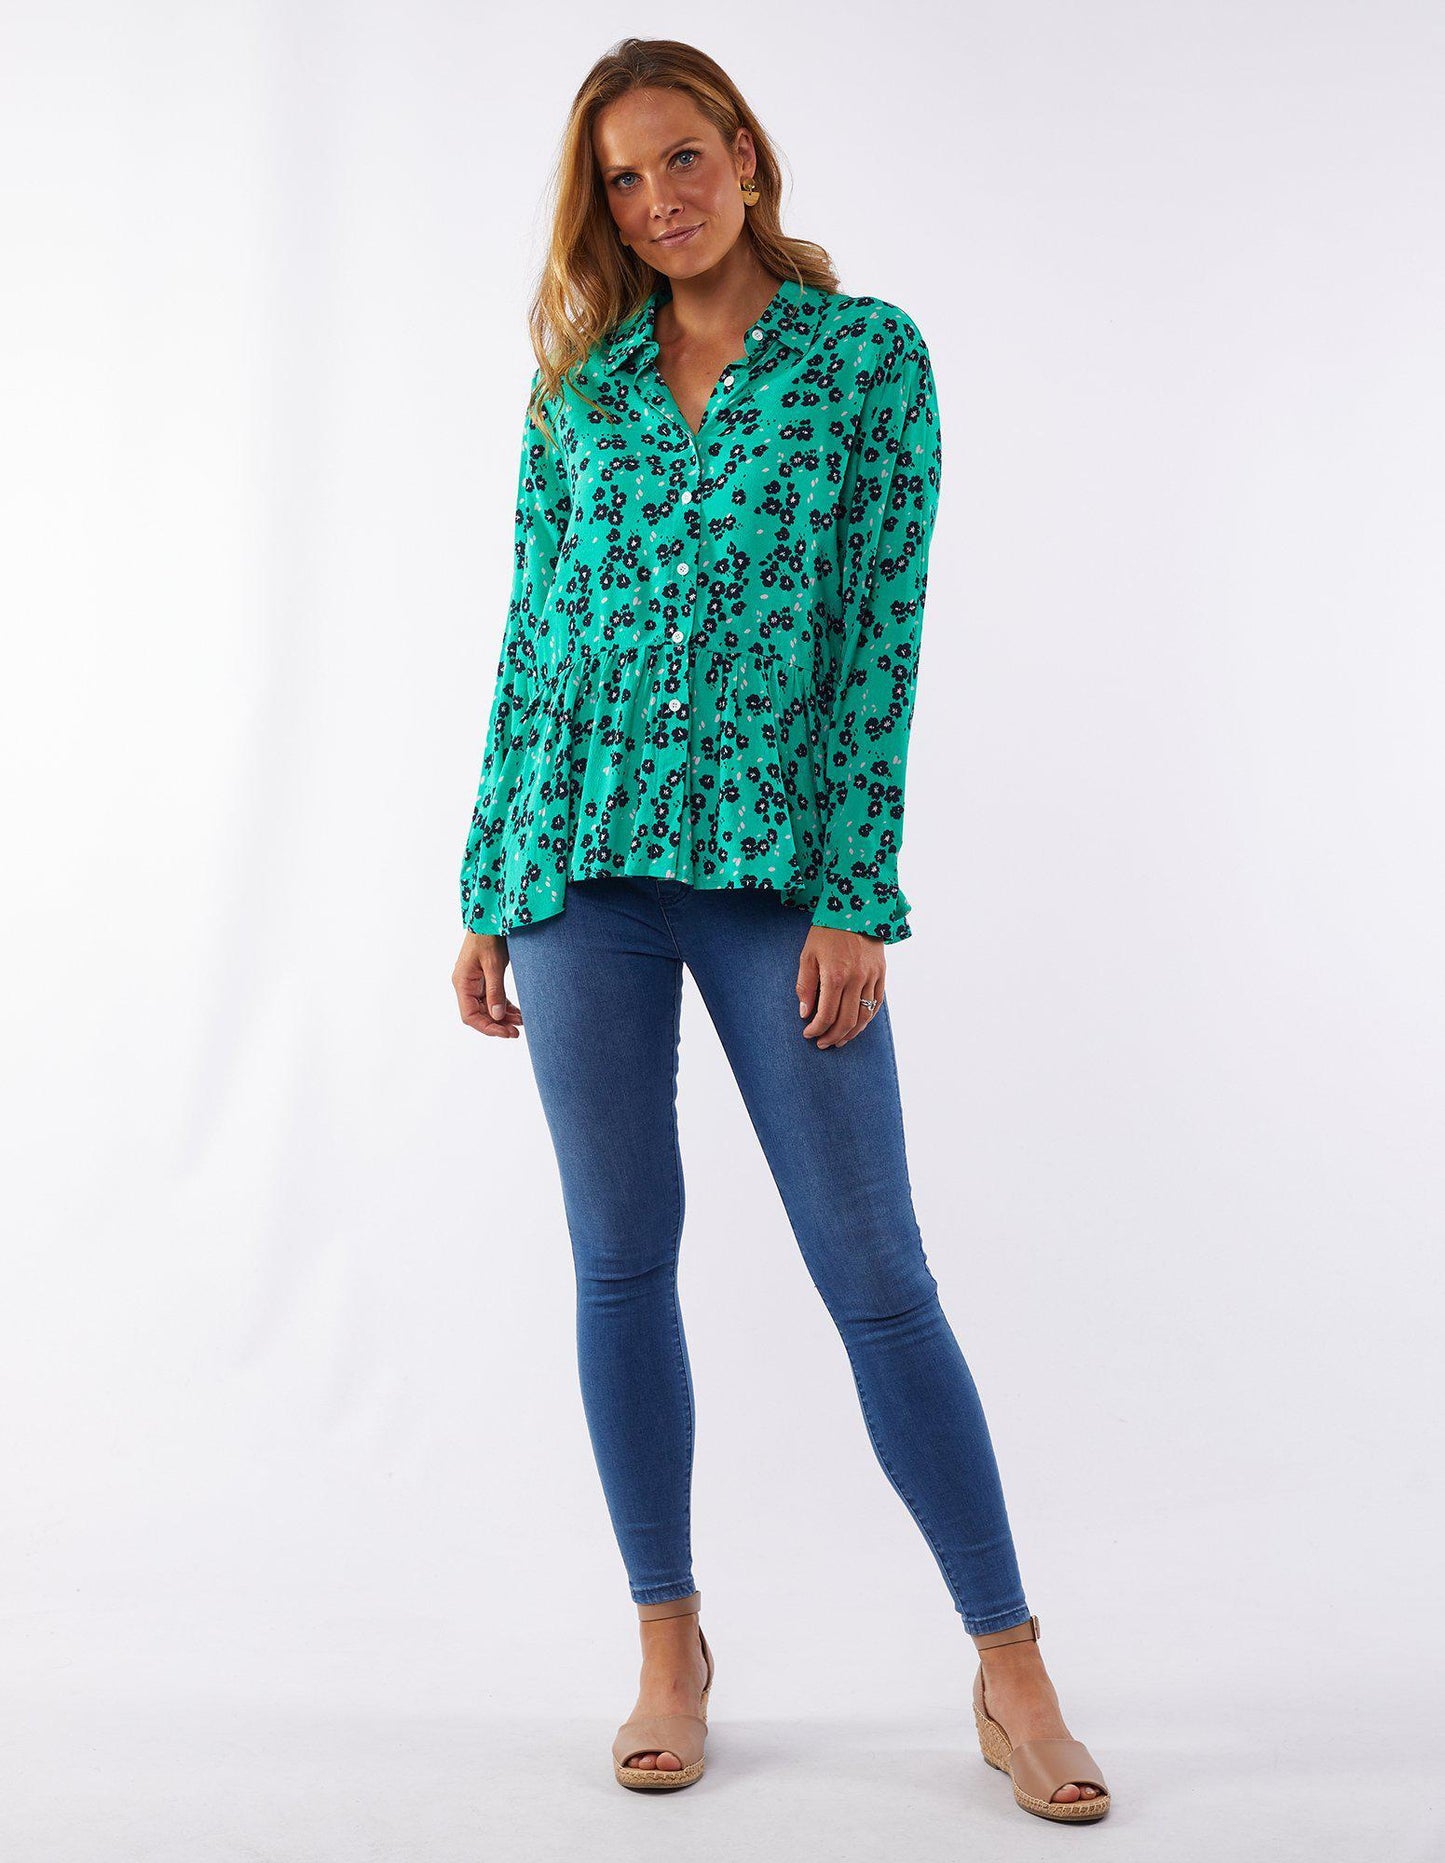 Eloise Floral Shirt - Green Floral - FUDGE Gifts Home Lifestyle